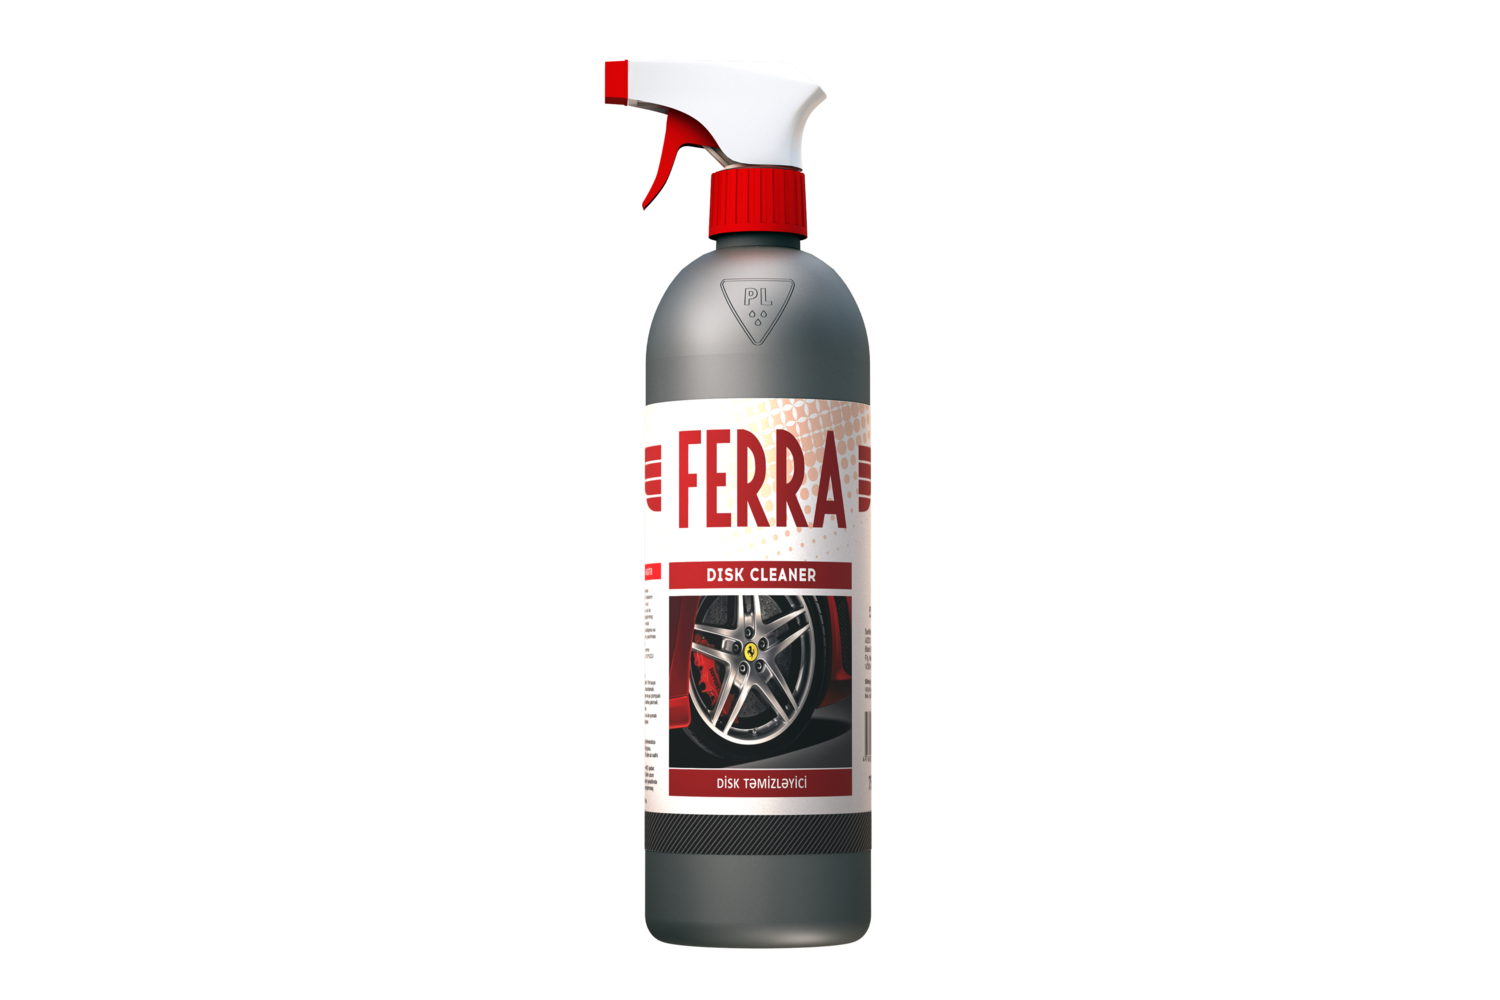 <span style="font-weight: bold;">ferra disc cleaner</span>